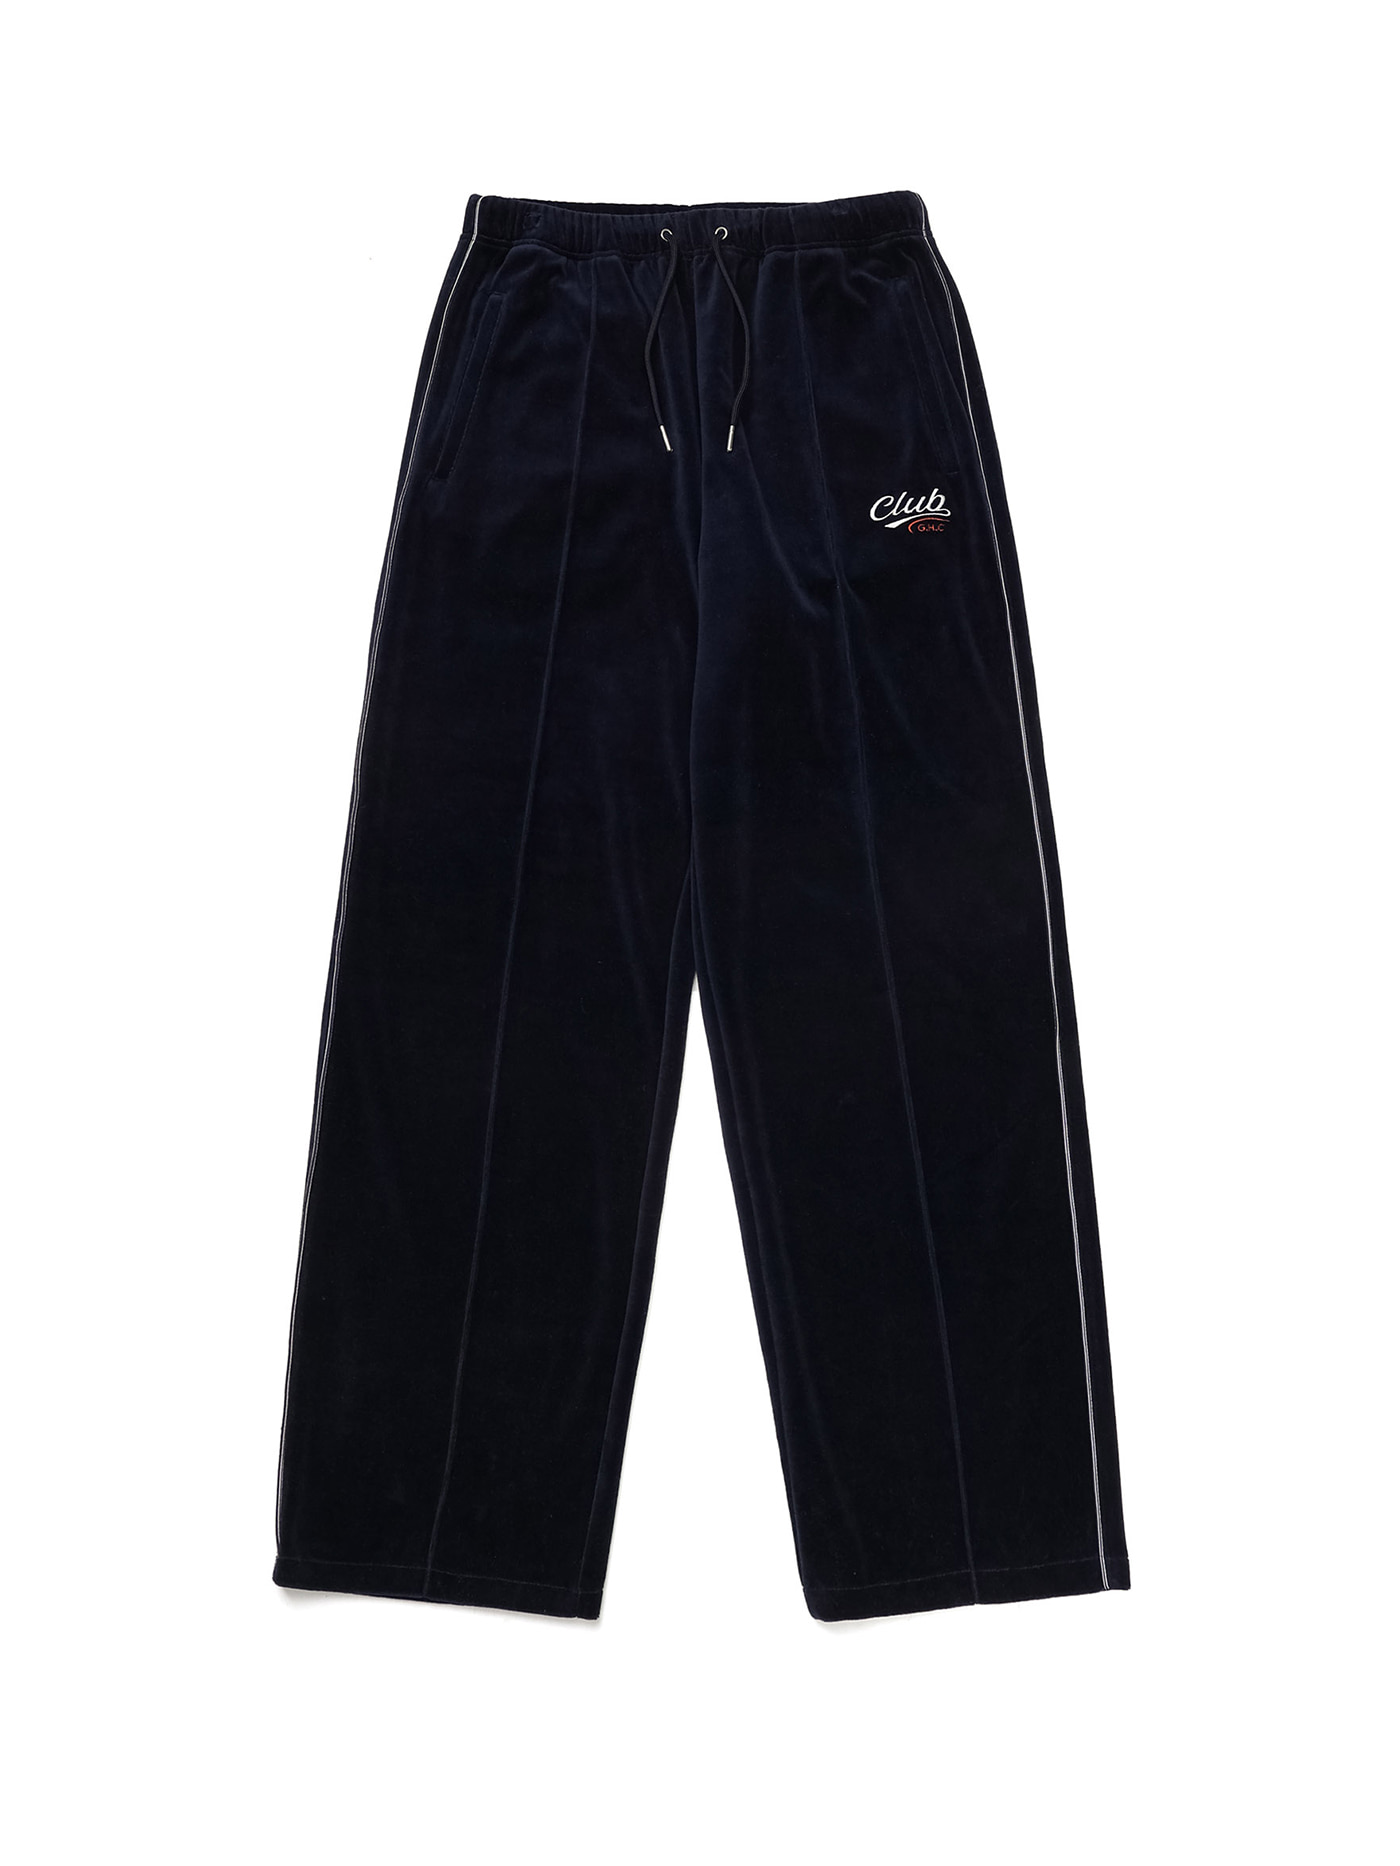 GHC LINE TRACK PANTS_NAVY